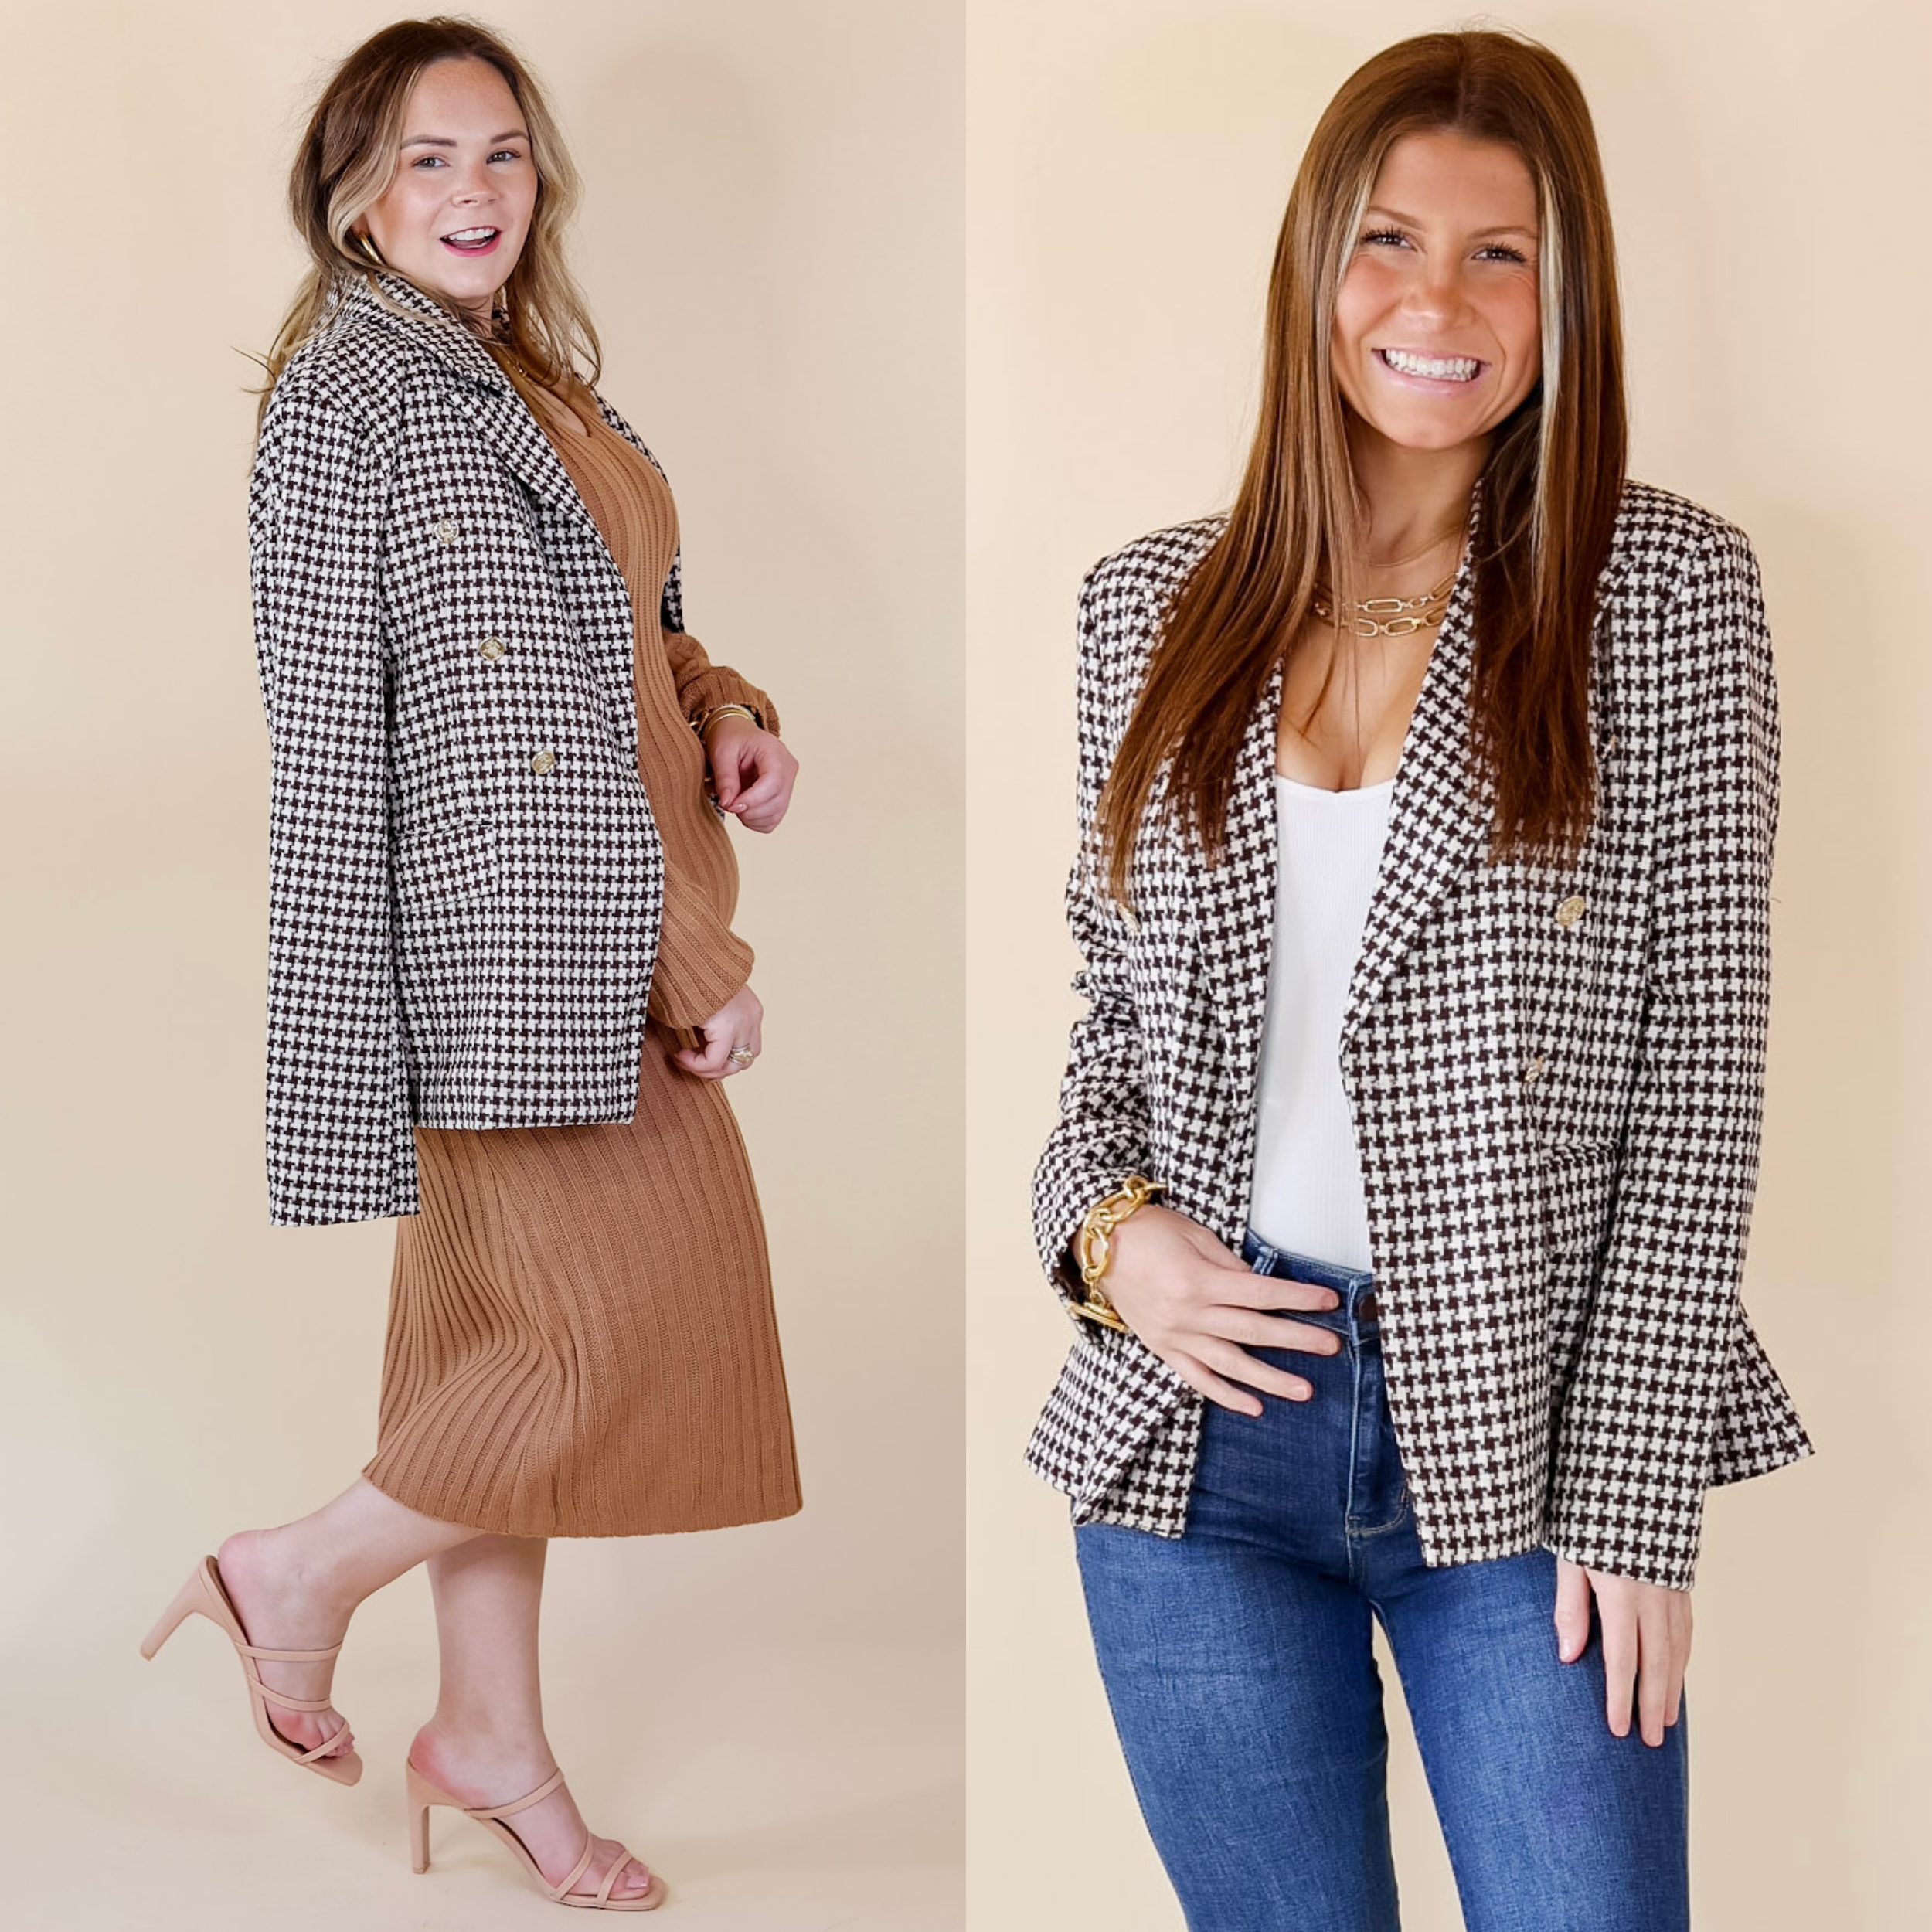 In the picture the model is wearing a shot of espresso houndstooth blazer with gold buttons in brown with a white background